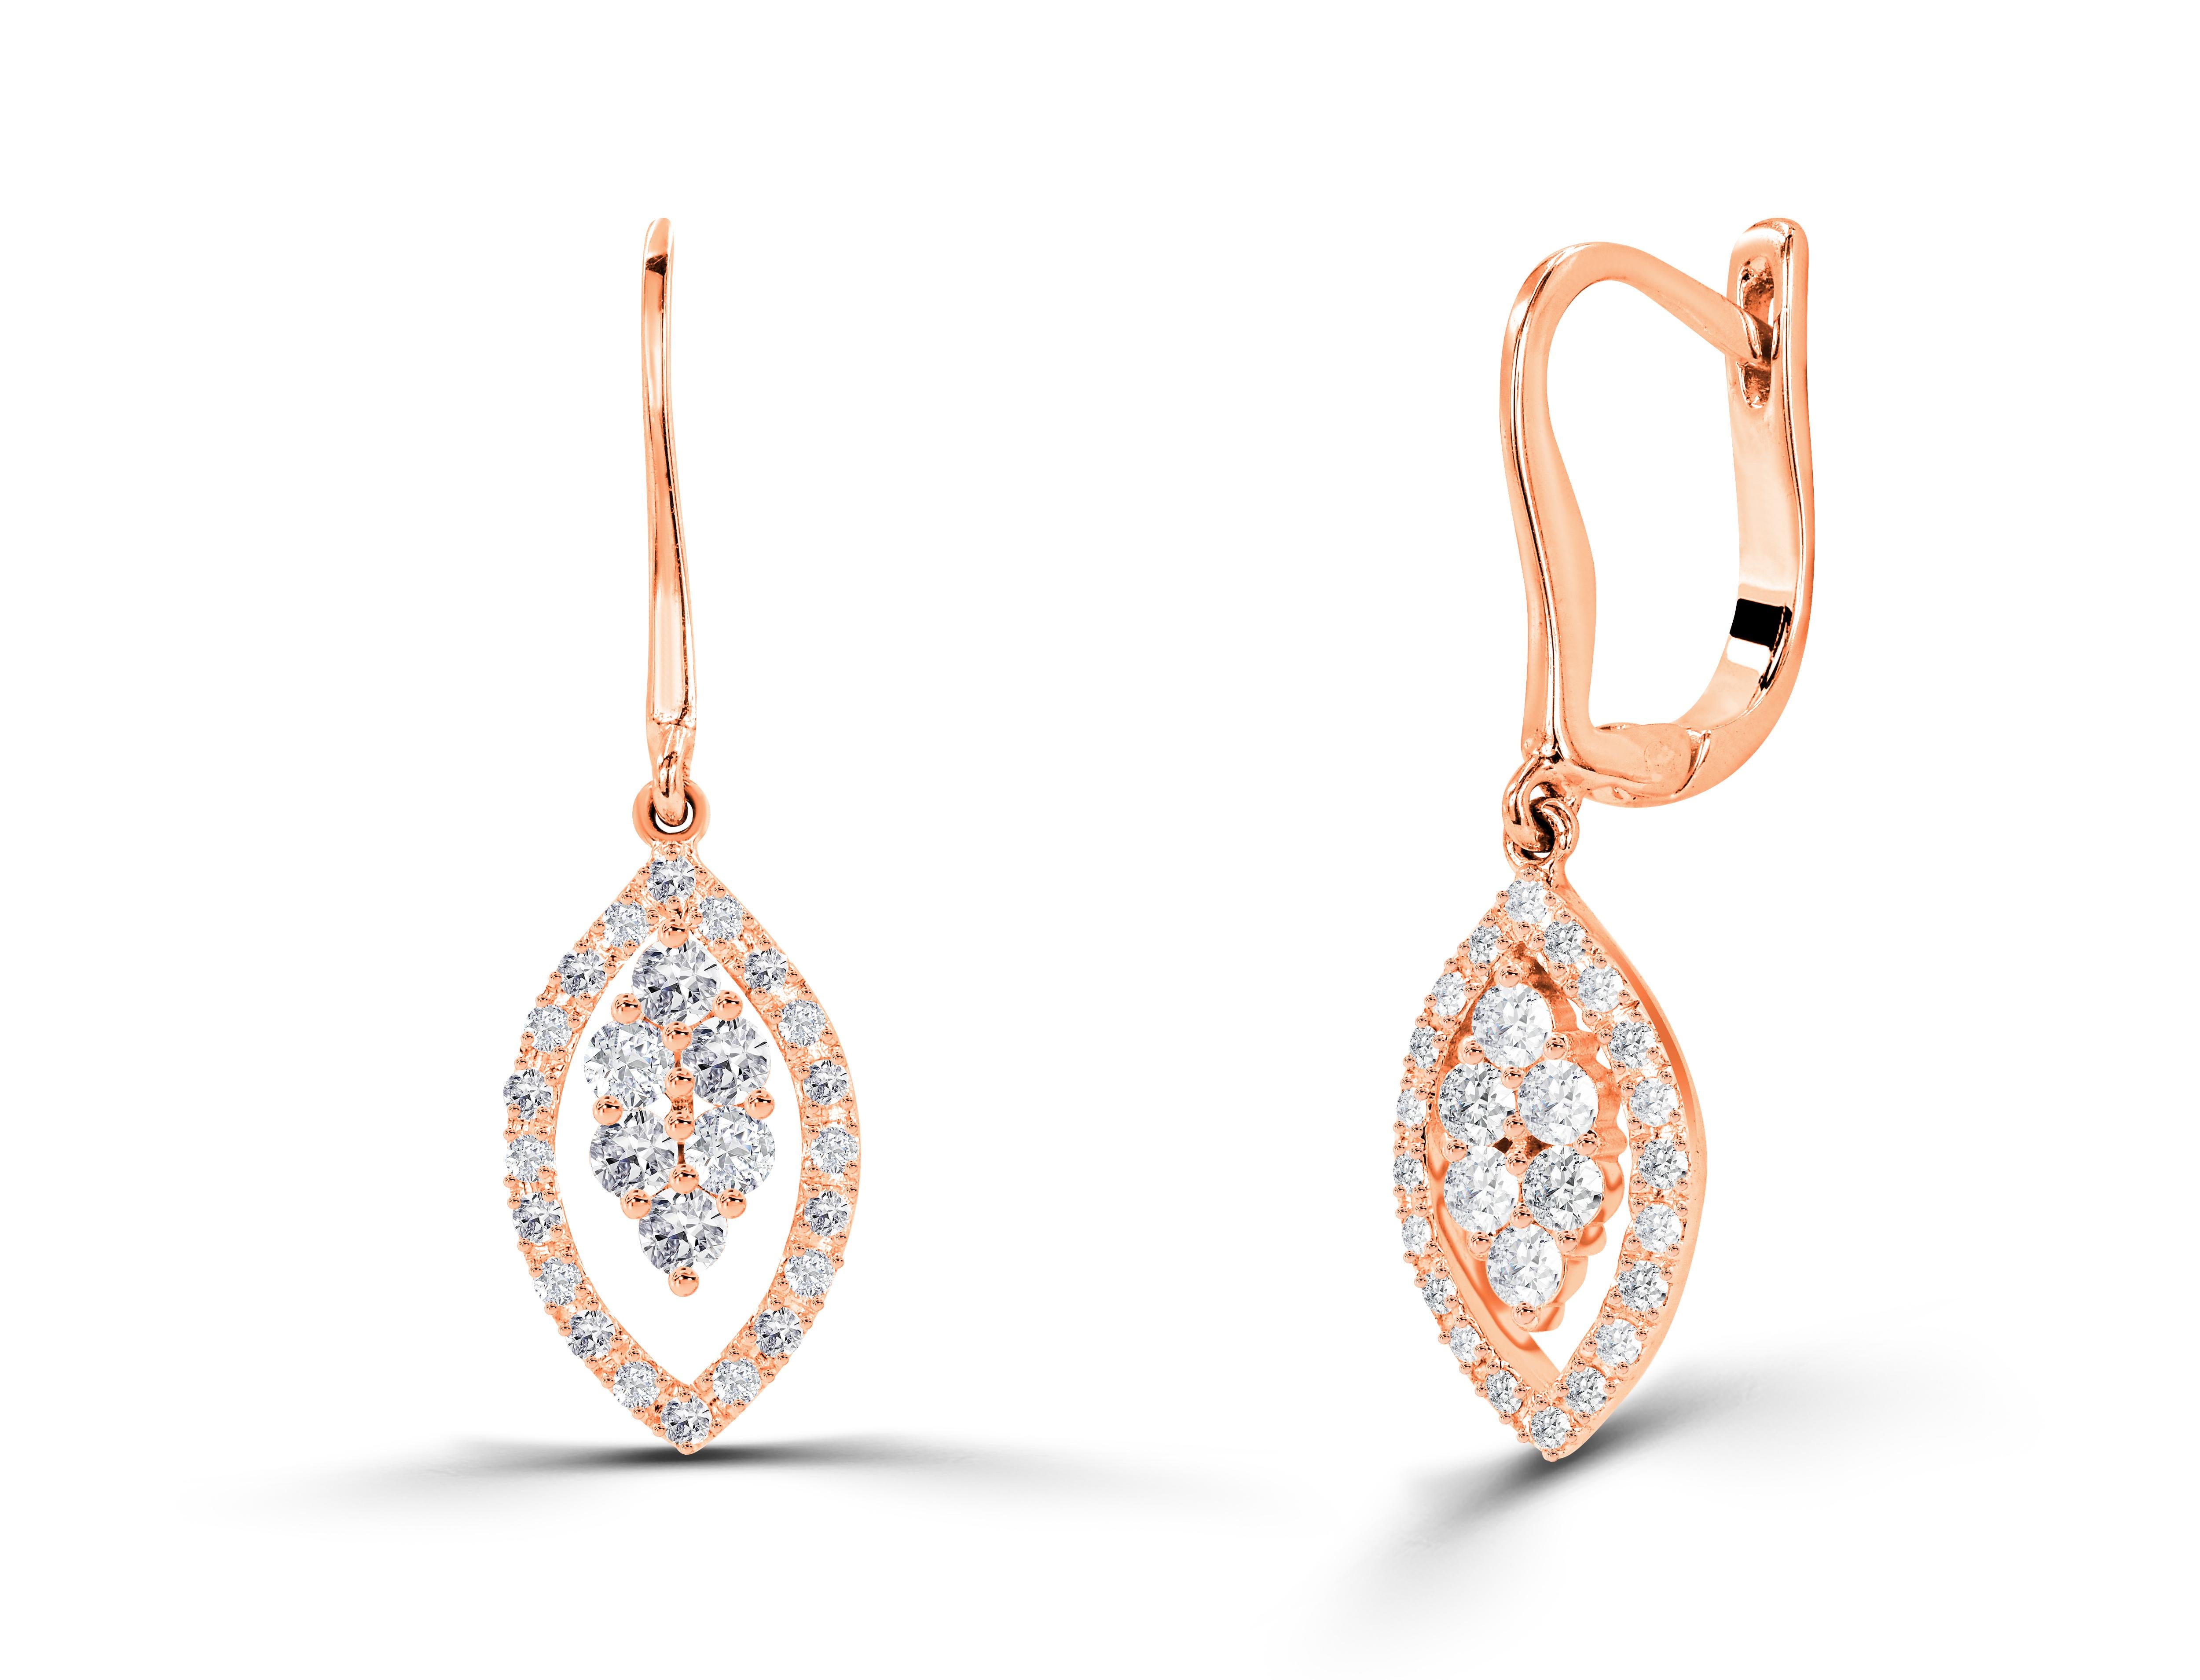 0.50 Ct Diamond Marquise shaped Drop Earrings in 14K Gold, Round Brilliant cut diamond earrings, Natural Diamond Earrings, Lever-Back earrings, Heavy End Earrings.

Jewels By Tarry presents to you a beautiful Earring collection with natural diamonds